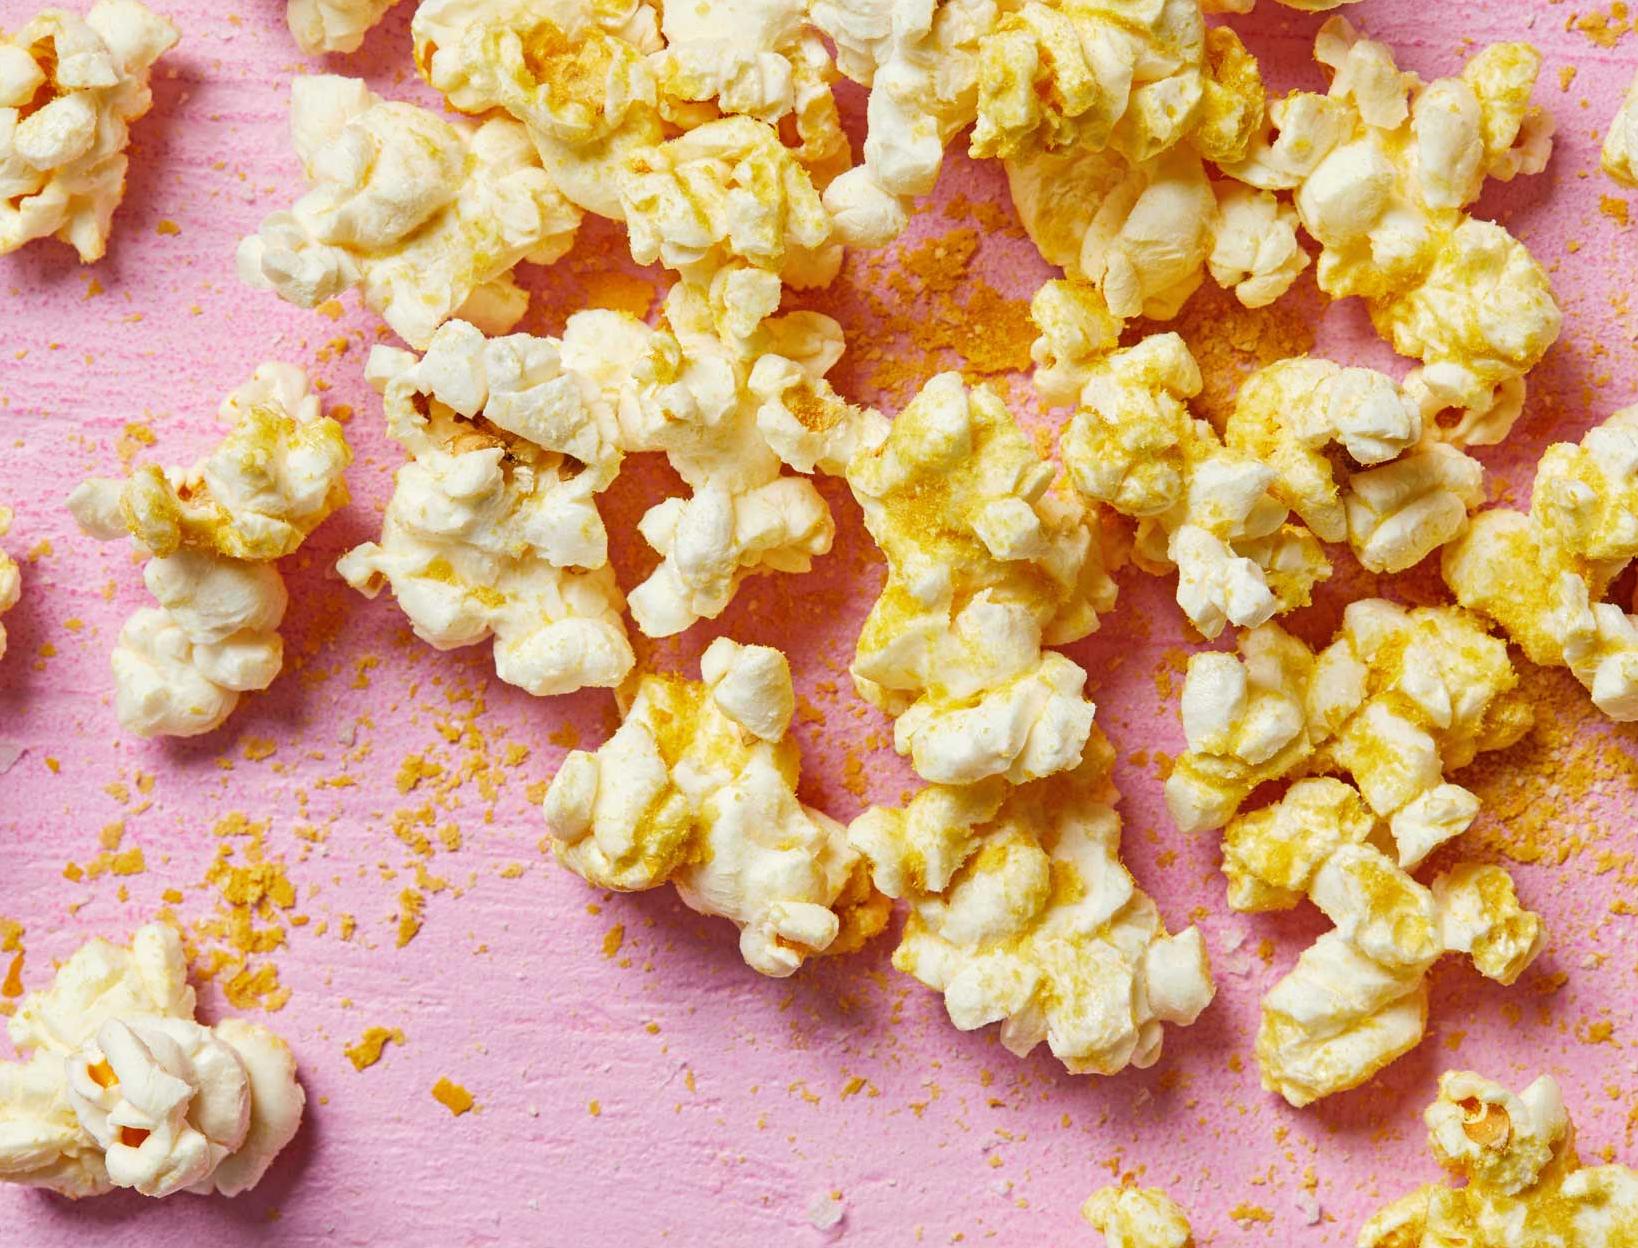  This recipe is so easy to make, you'll be munching on flavorful popcorn in no time.